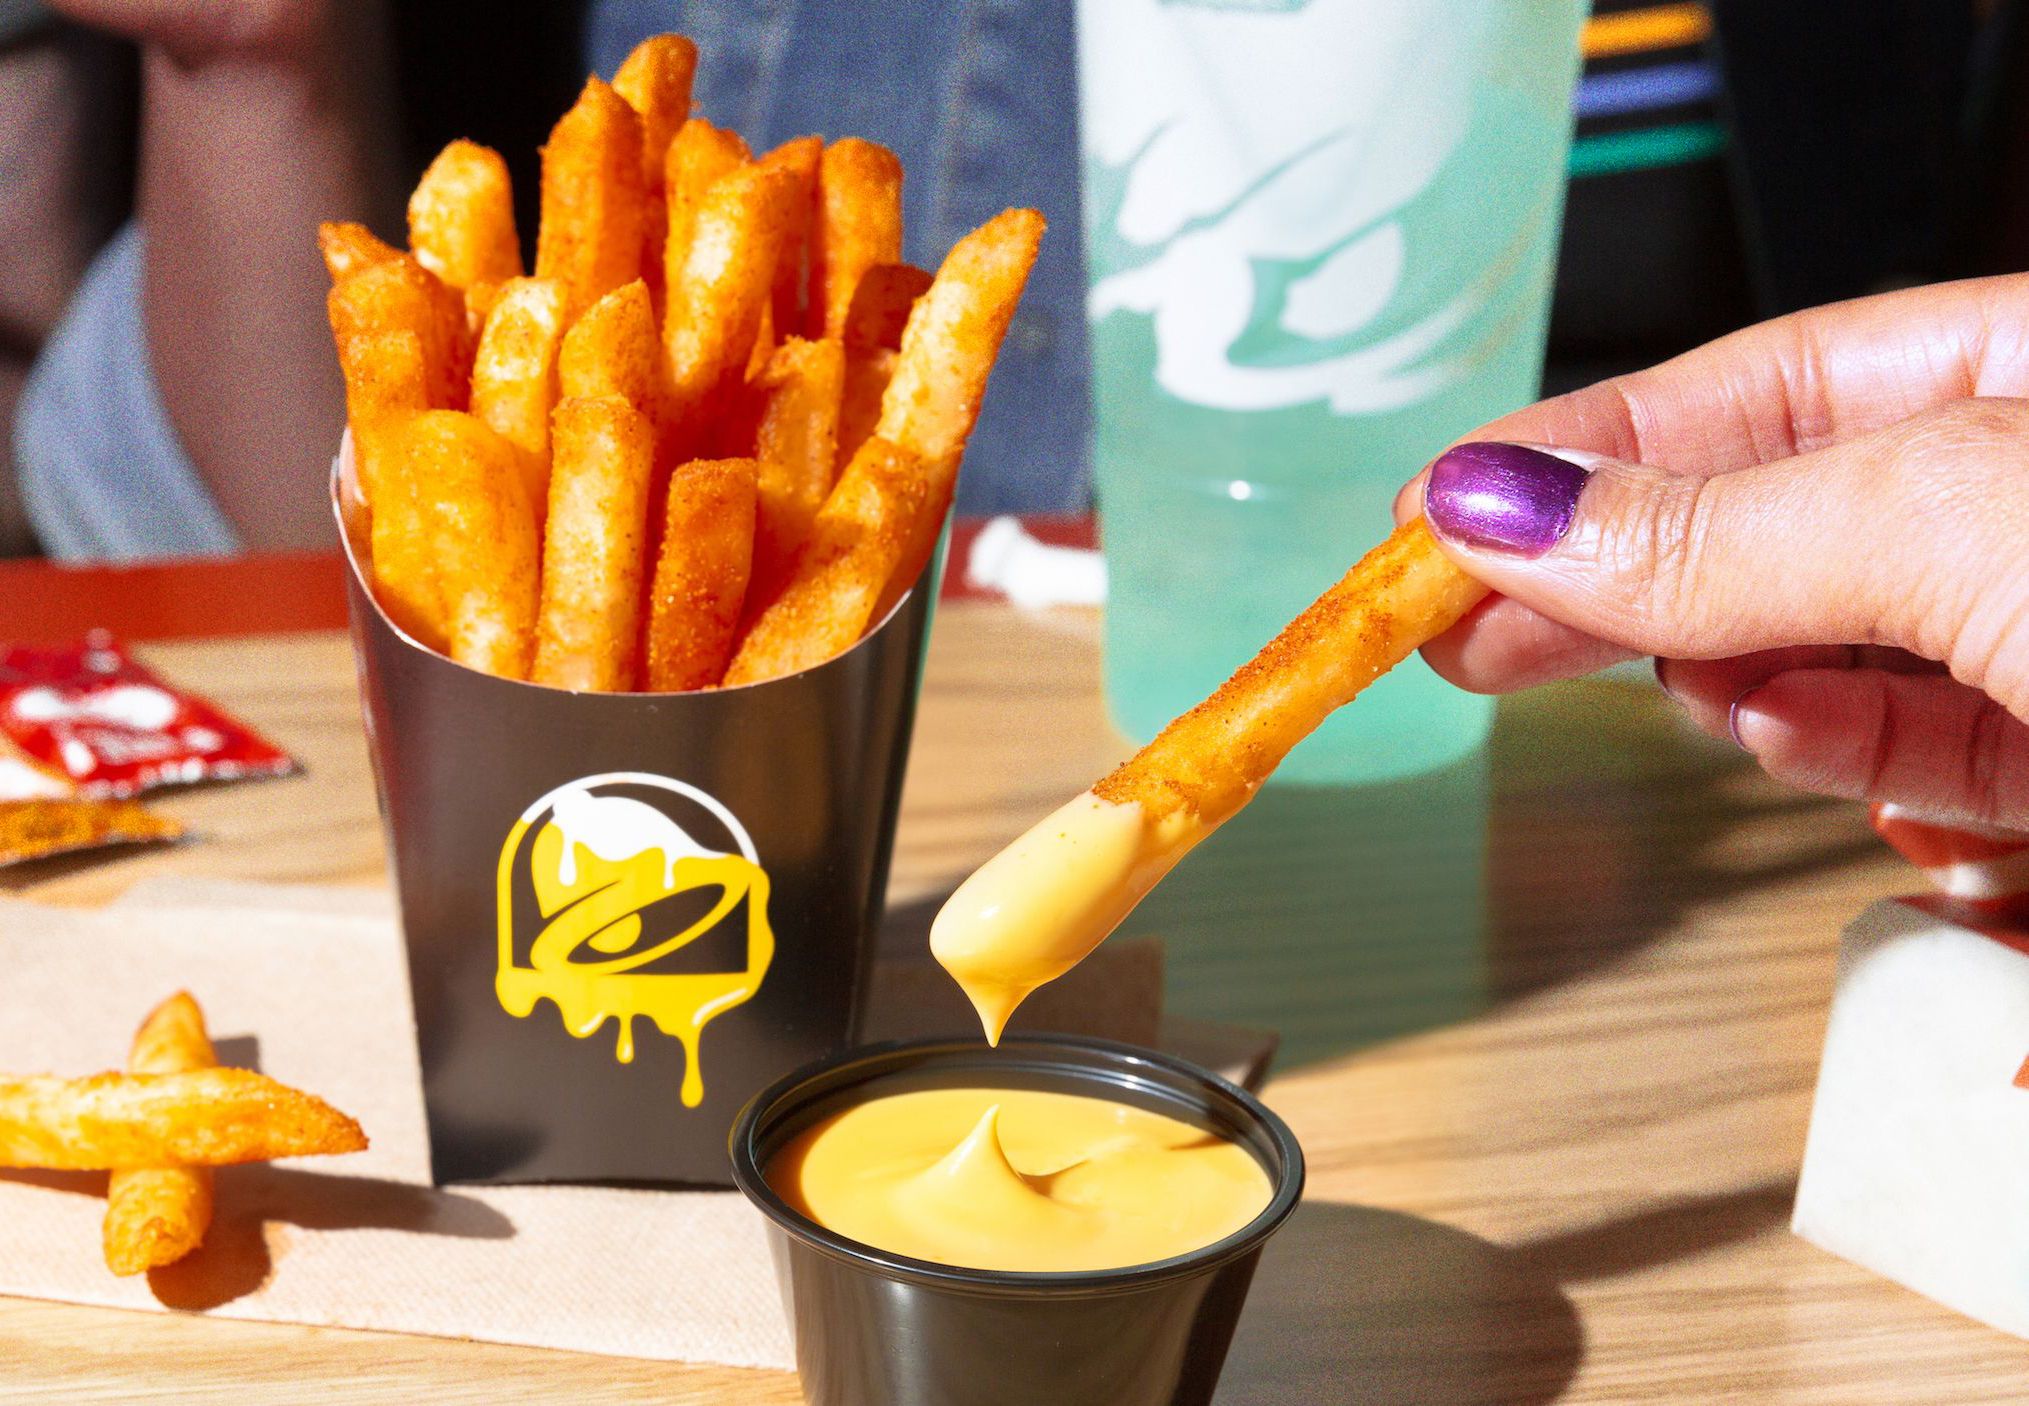 Seasoned Nacho Fries are being Reintroduced to the Taco Bell Menu this Winter